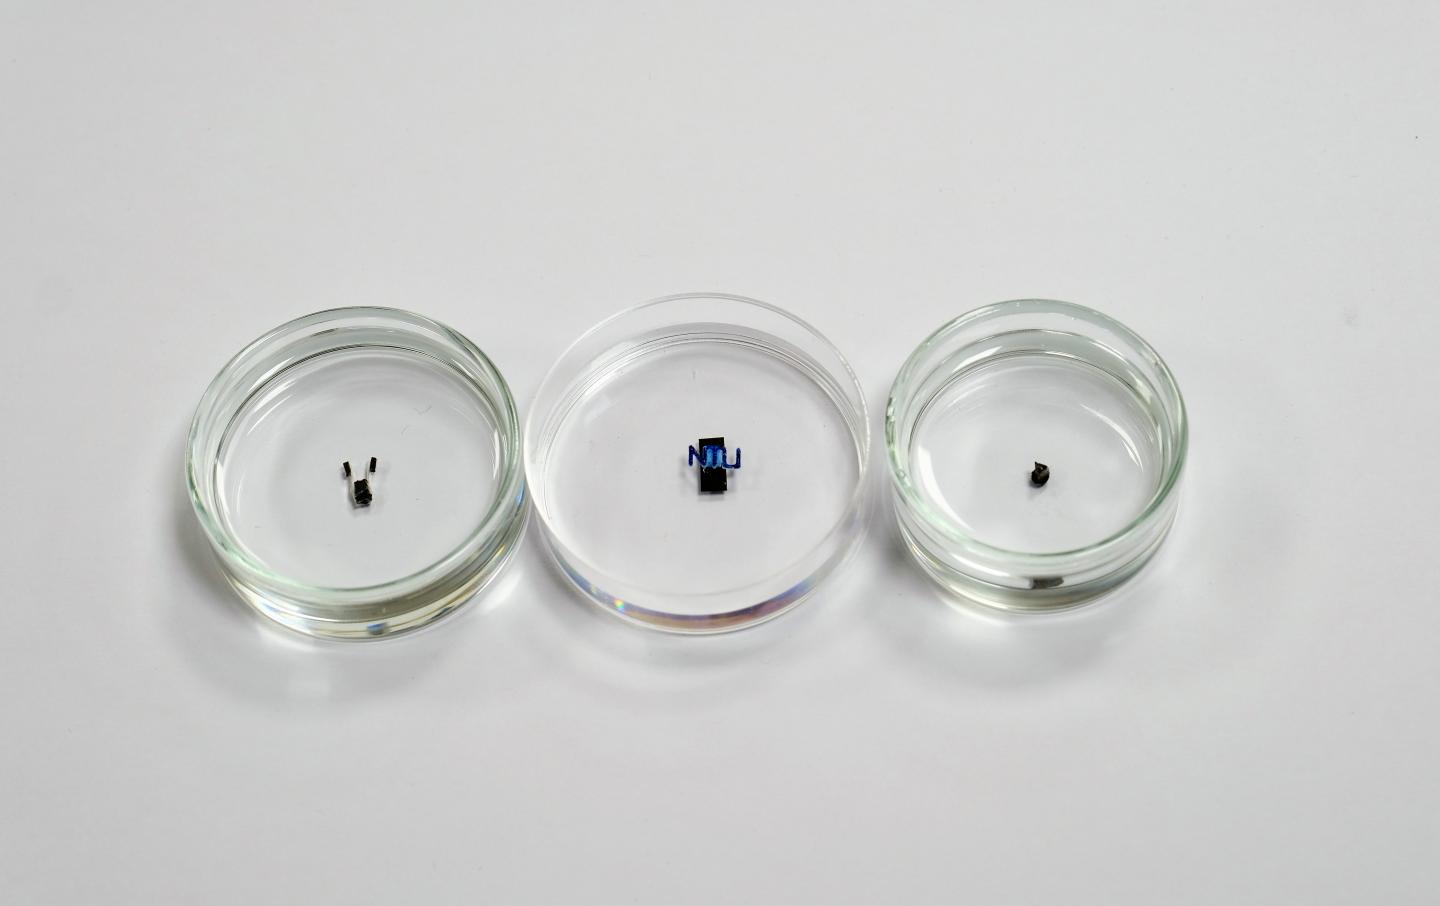 NTU Singapore Scientists Make Highly Maneuverable Miniature Robots Controlled by Magnetic Fields